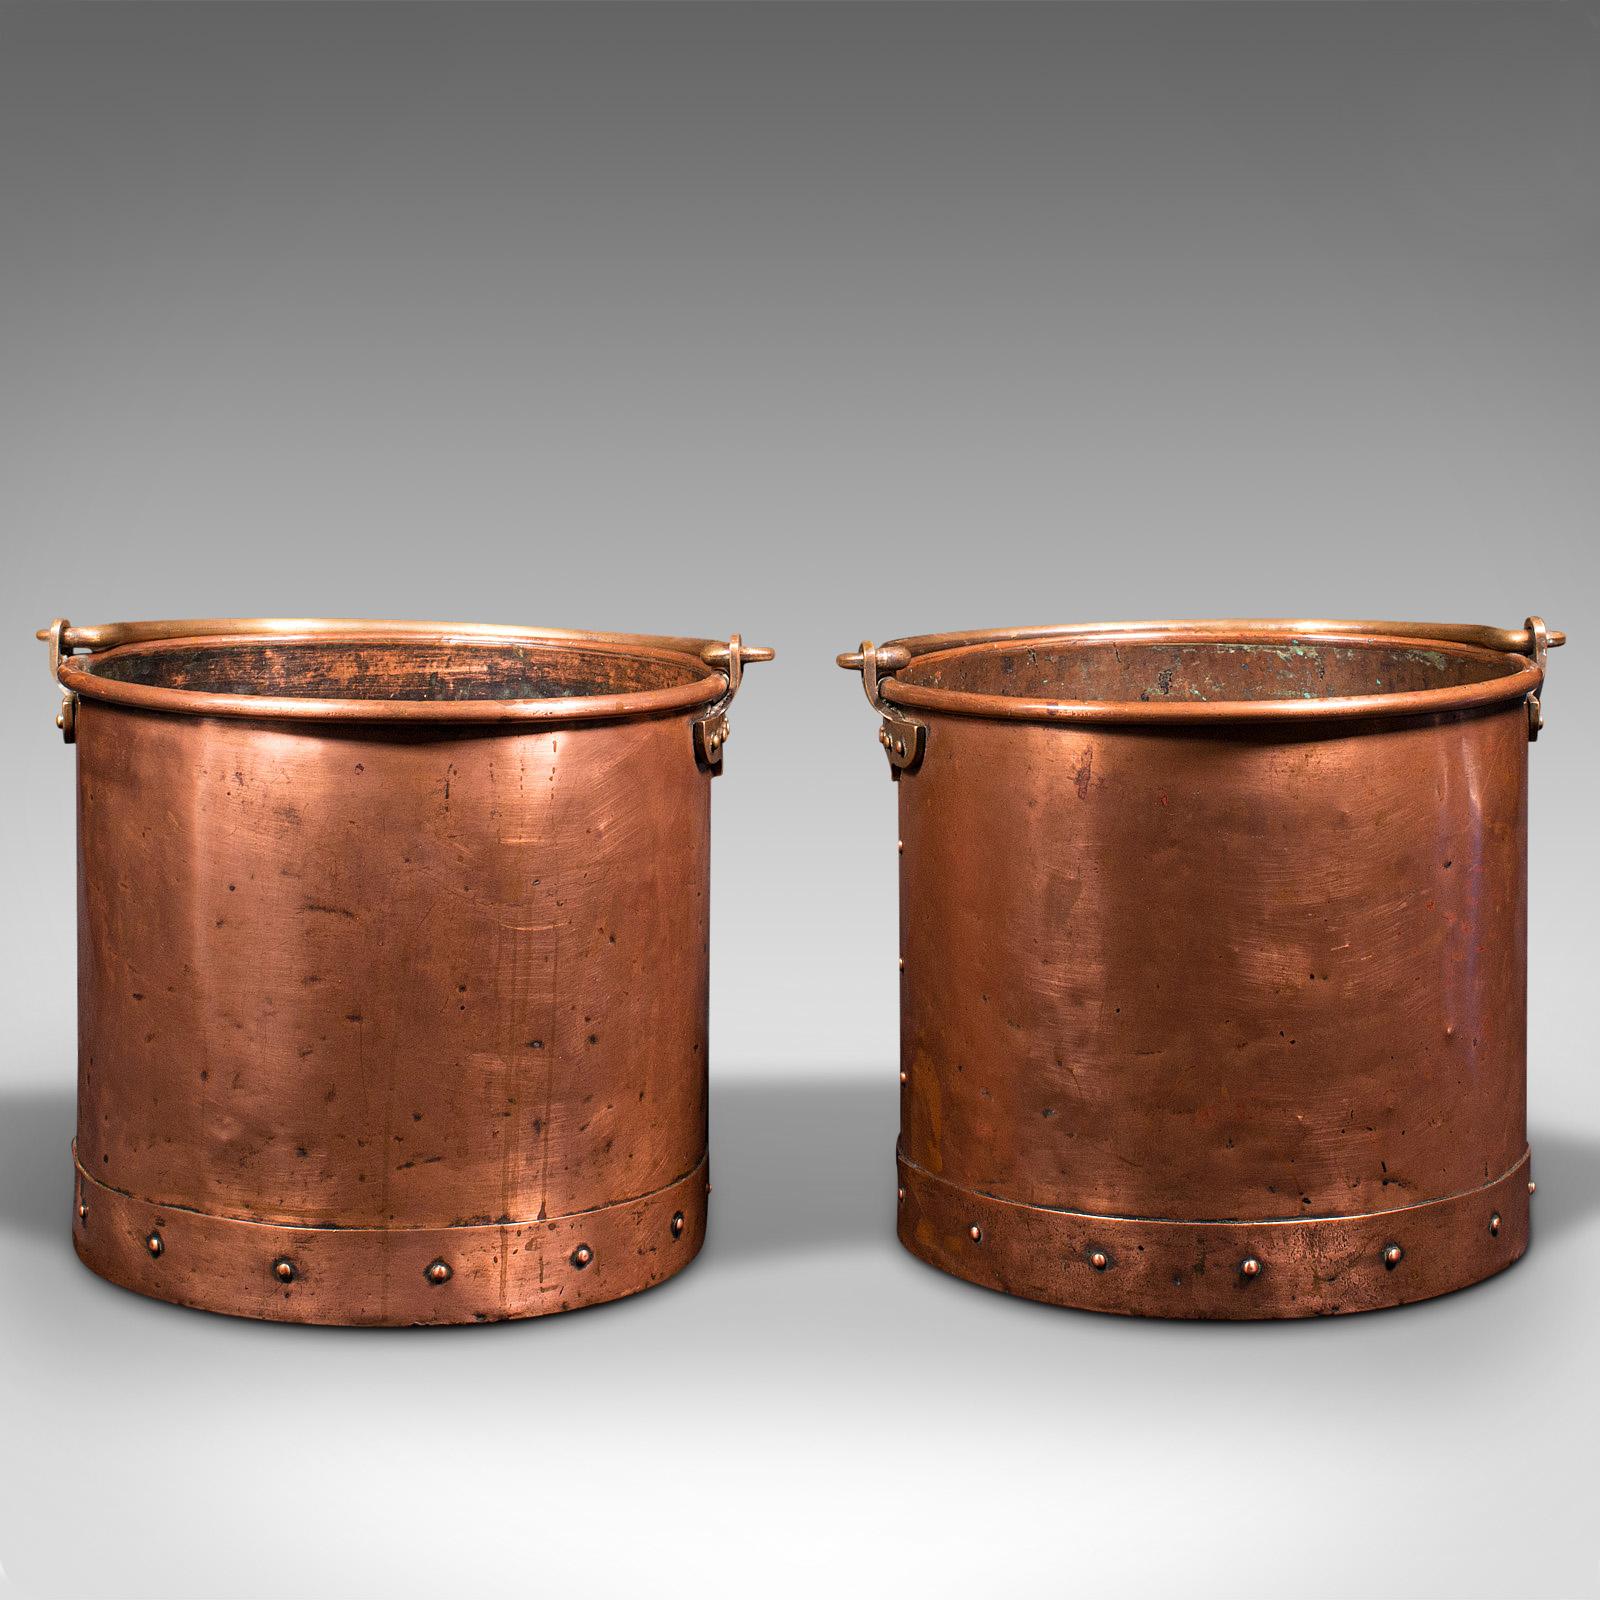 This is a pair of antique fireside bins. An English, copper coal or fire bucket, dating to the Victorian period, circa 1860.

Wonderfully unusual as a pair with superb colour
Displaying a desirable aged patina and good antique order
Copper body